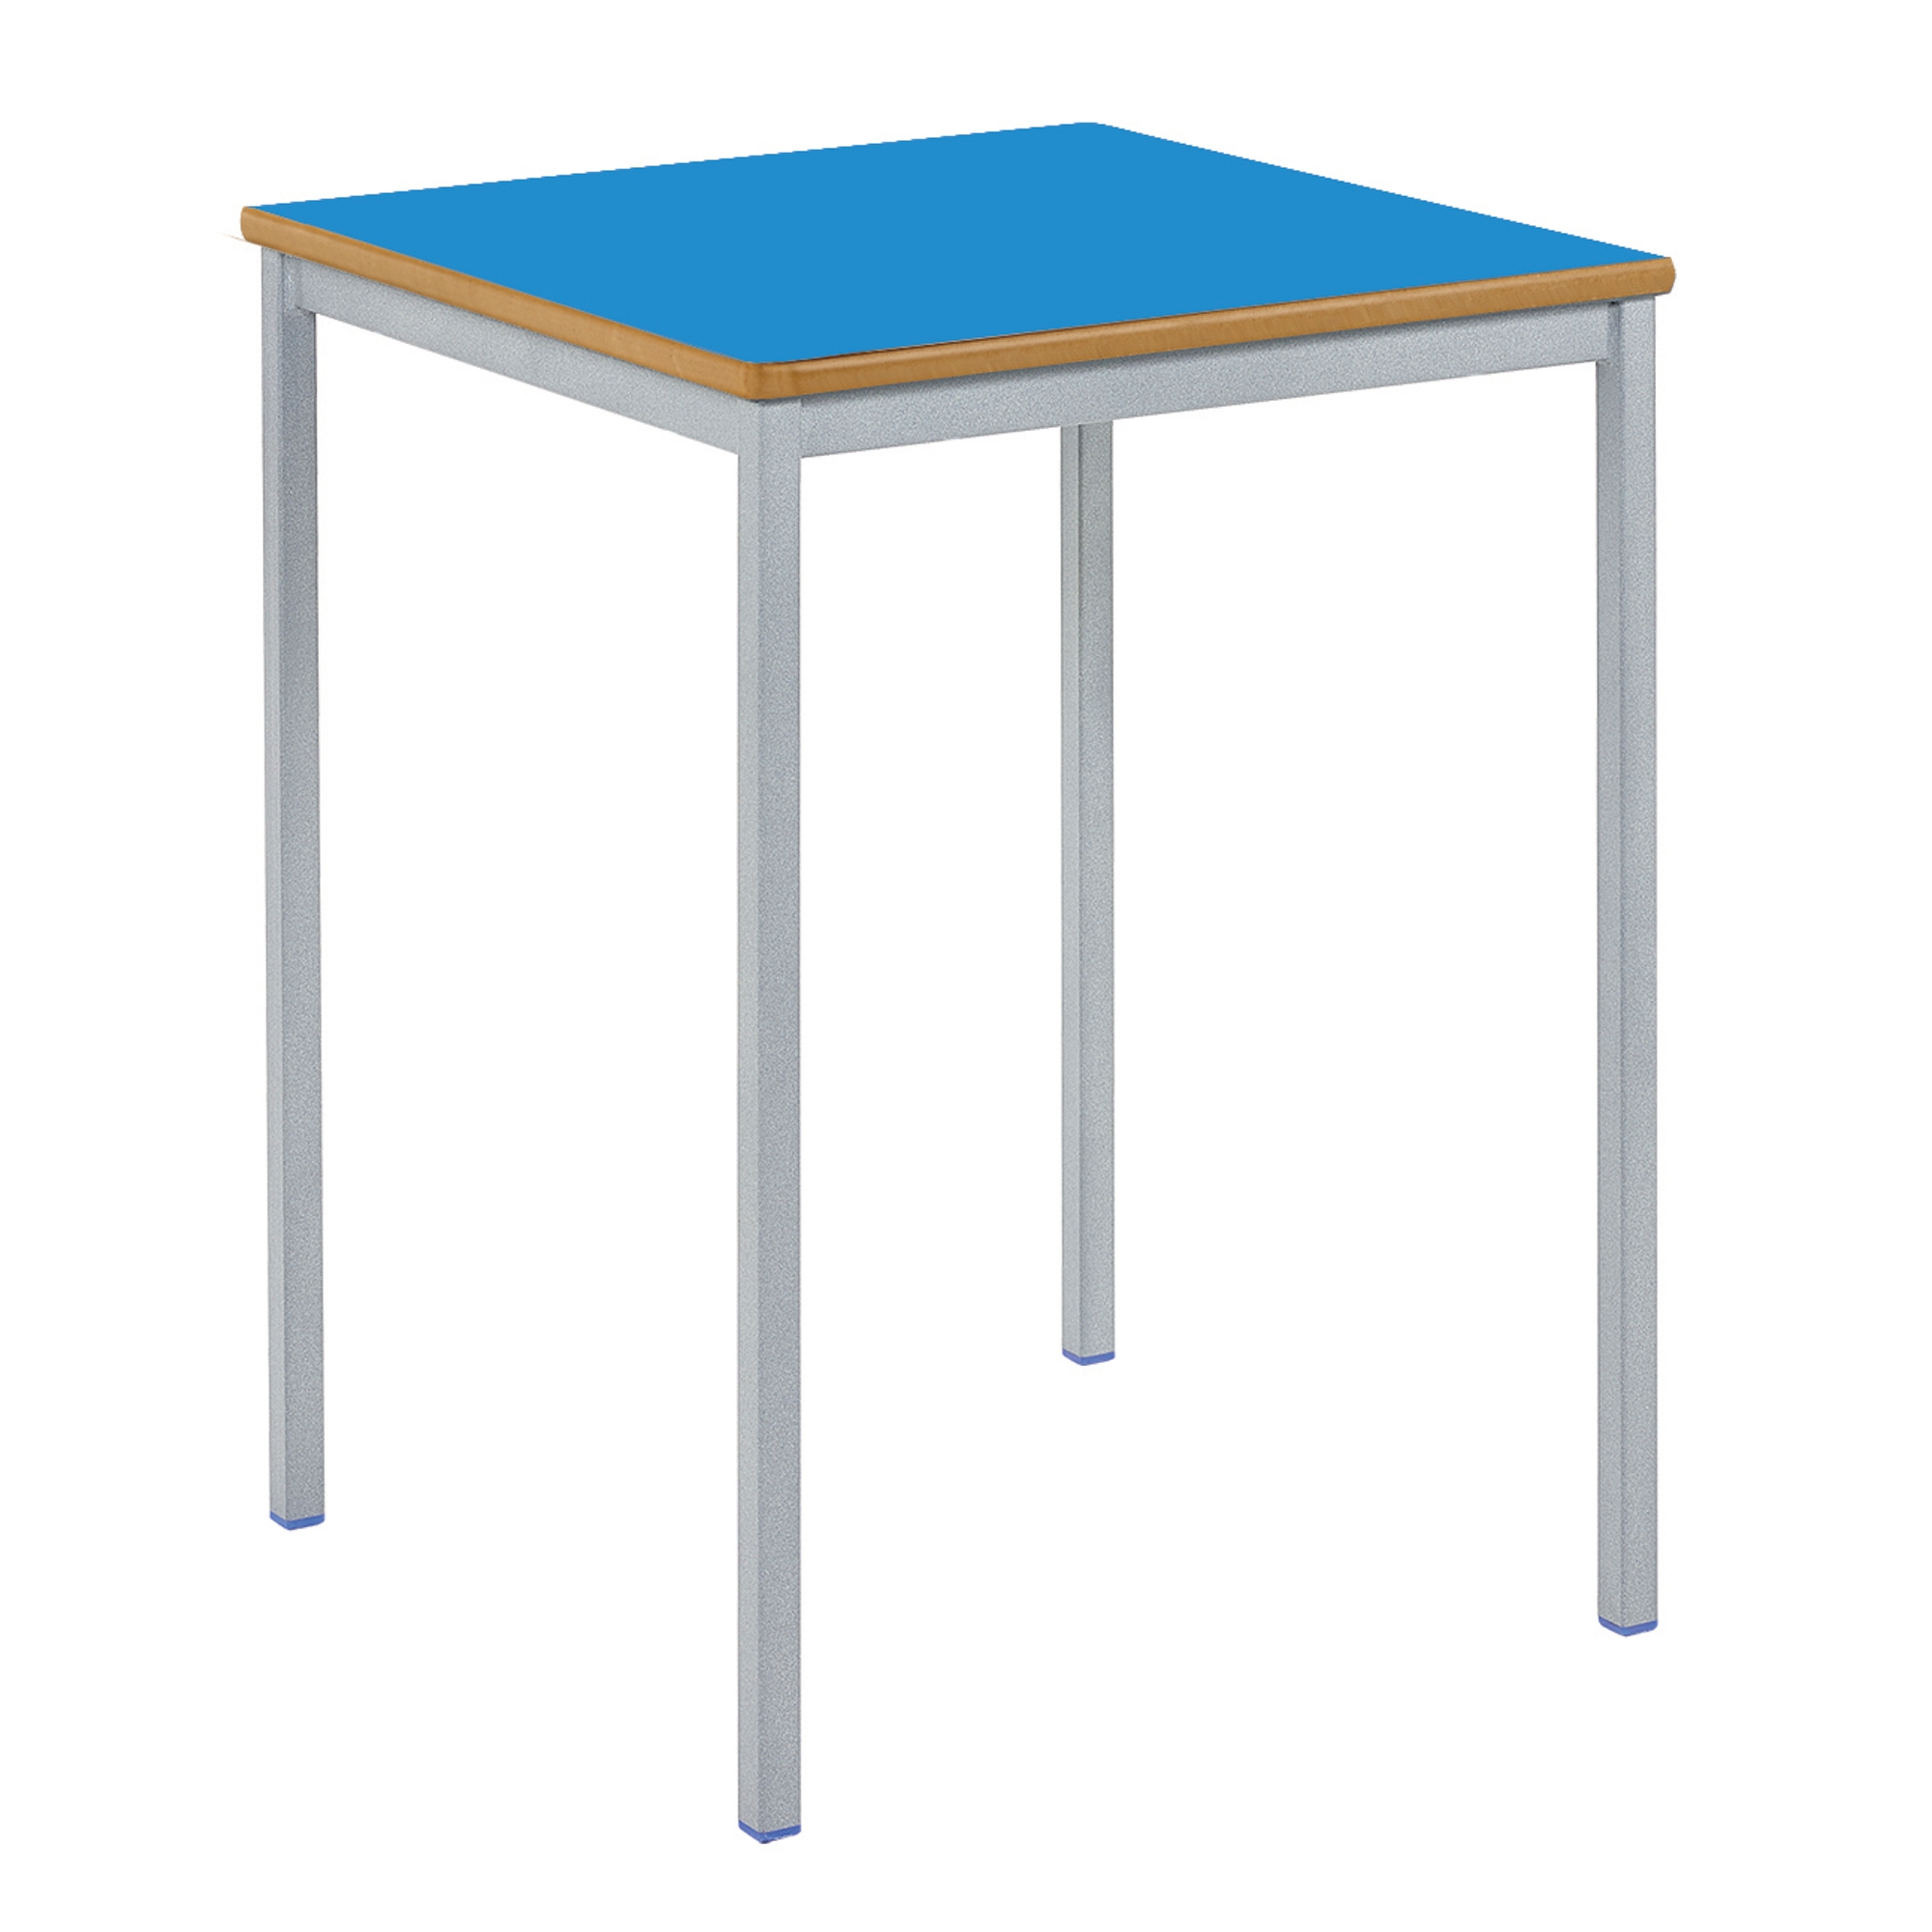 Classmates Square Fully Welded Classroom Table - 600 x 600 x 530mm - Blue